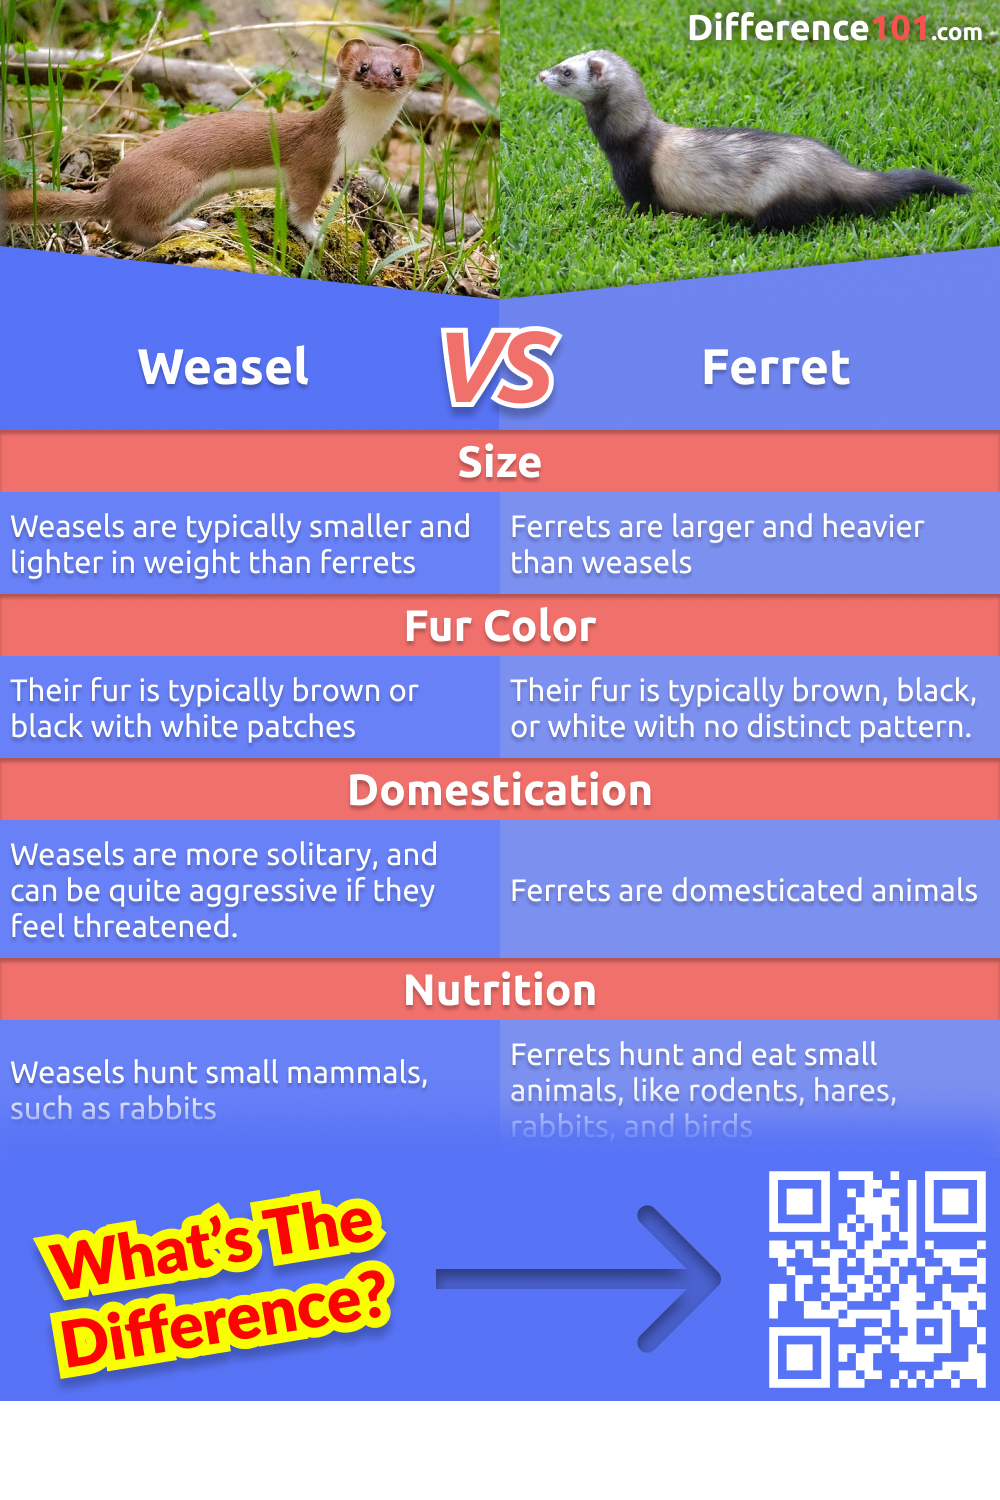 Weasels and ferrets are often confused for one another, but there are a few differences between the two animals. In this article, we'll explore the pros and cons of each animal and their key differences.